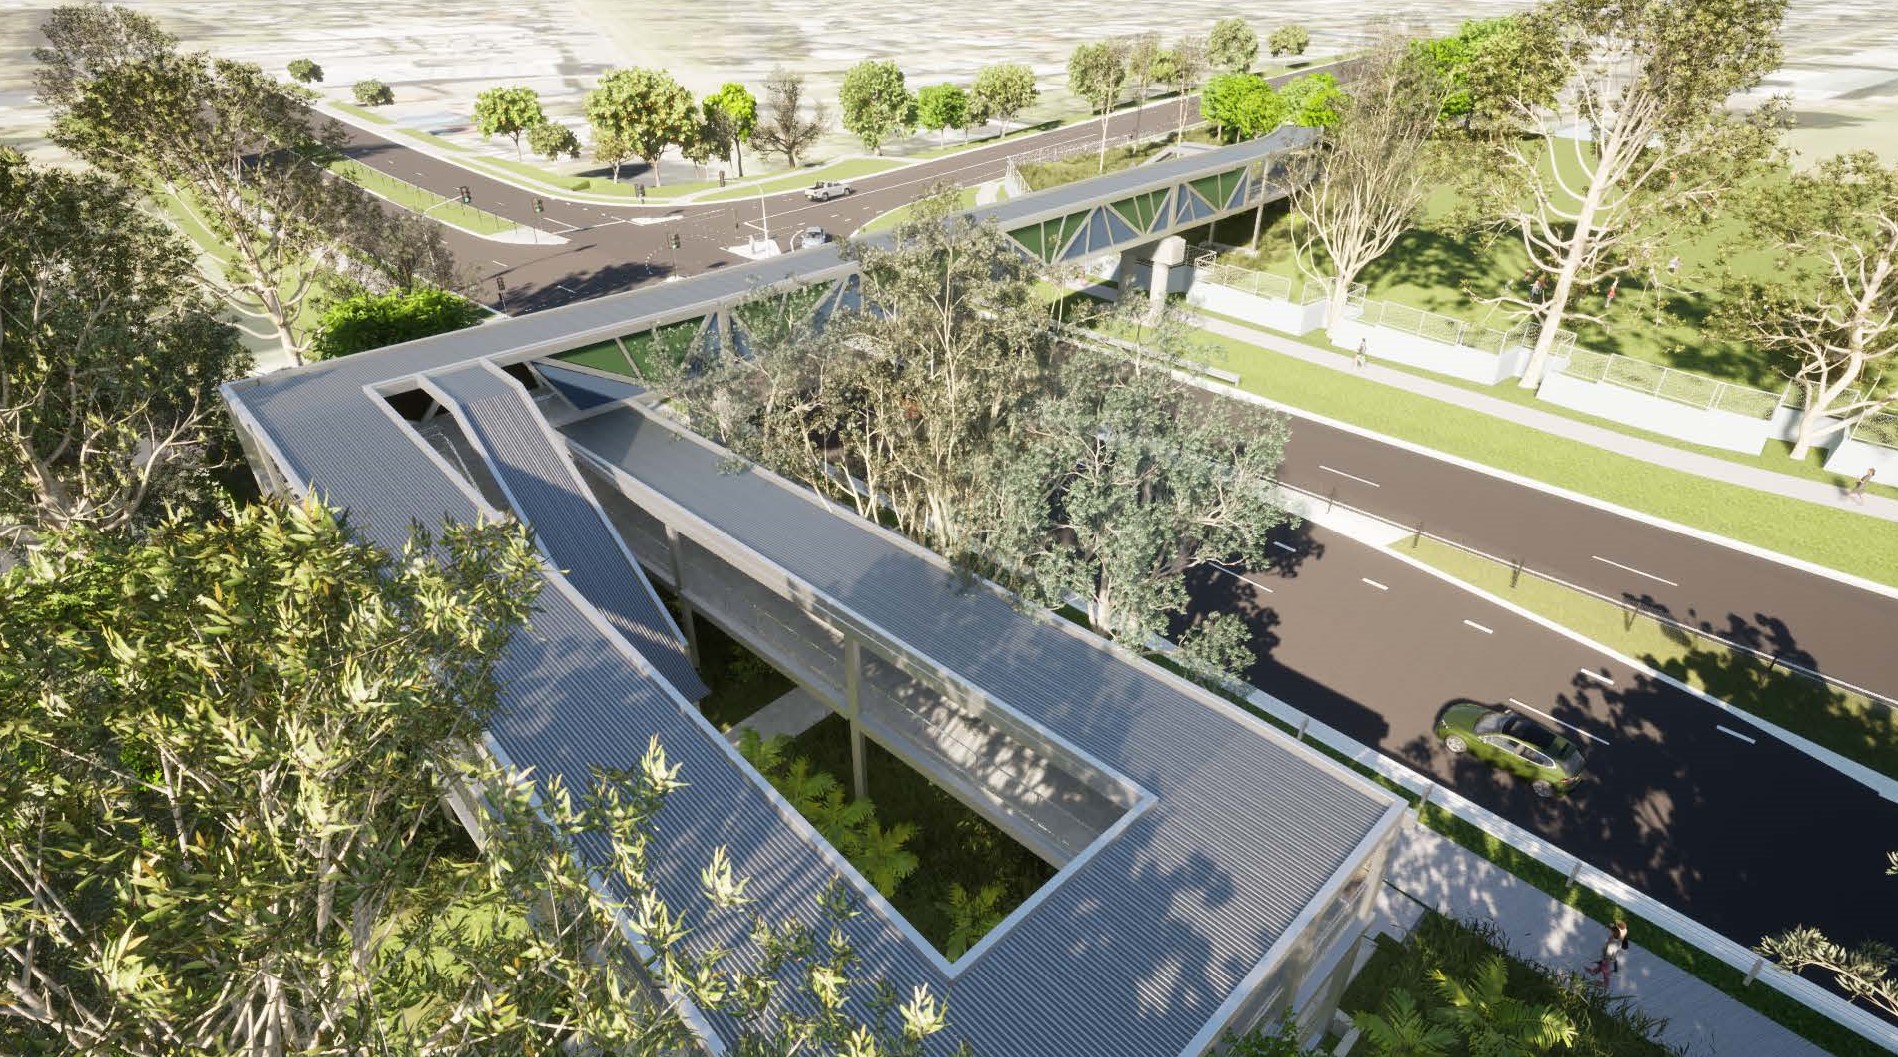 Artist impression of aerial view of pedestrian overpass from southwestern position showing overpass, ramps, stairs, pedestrian fencing and paths.